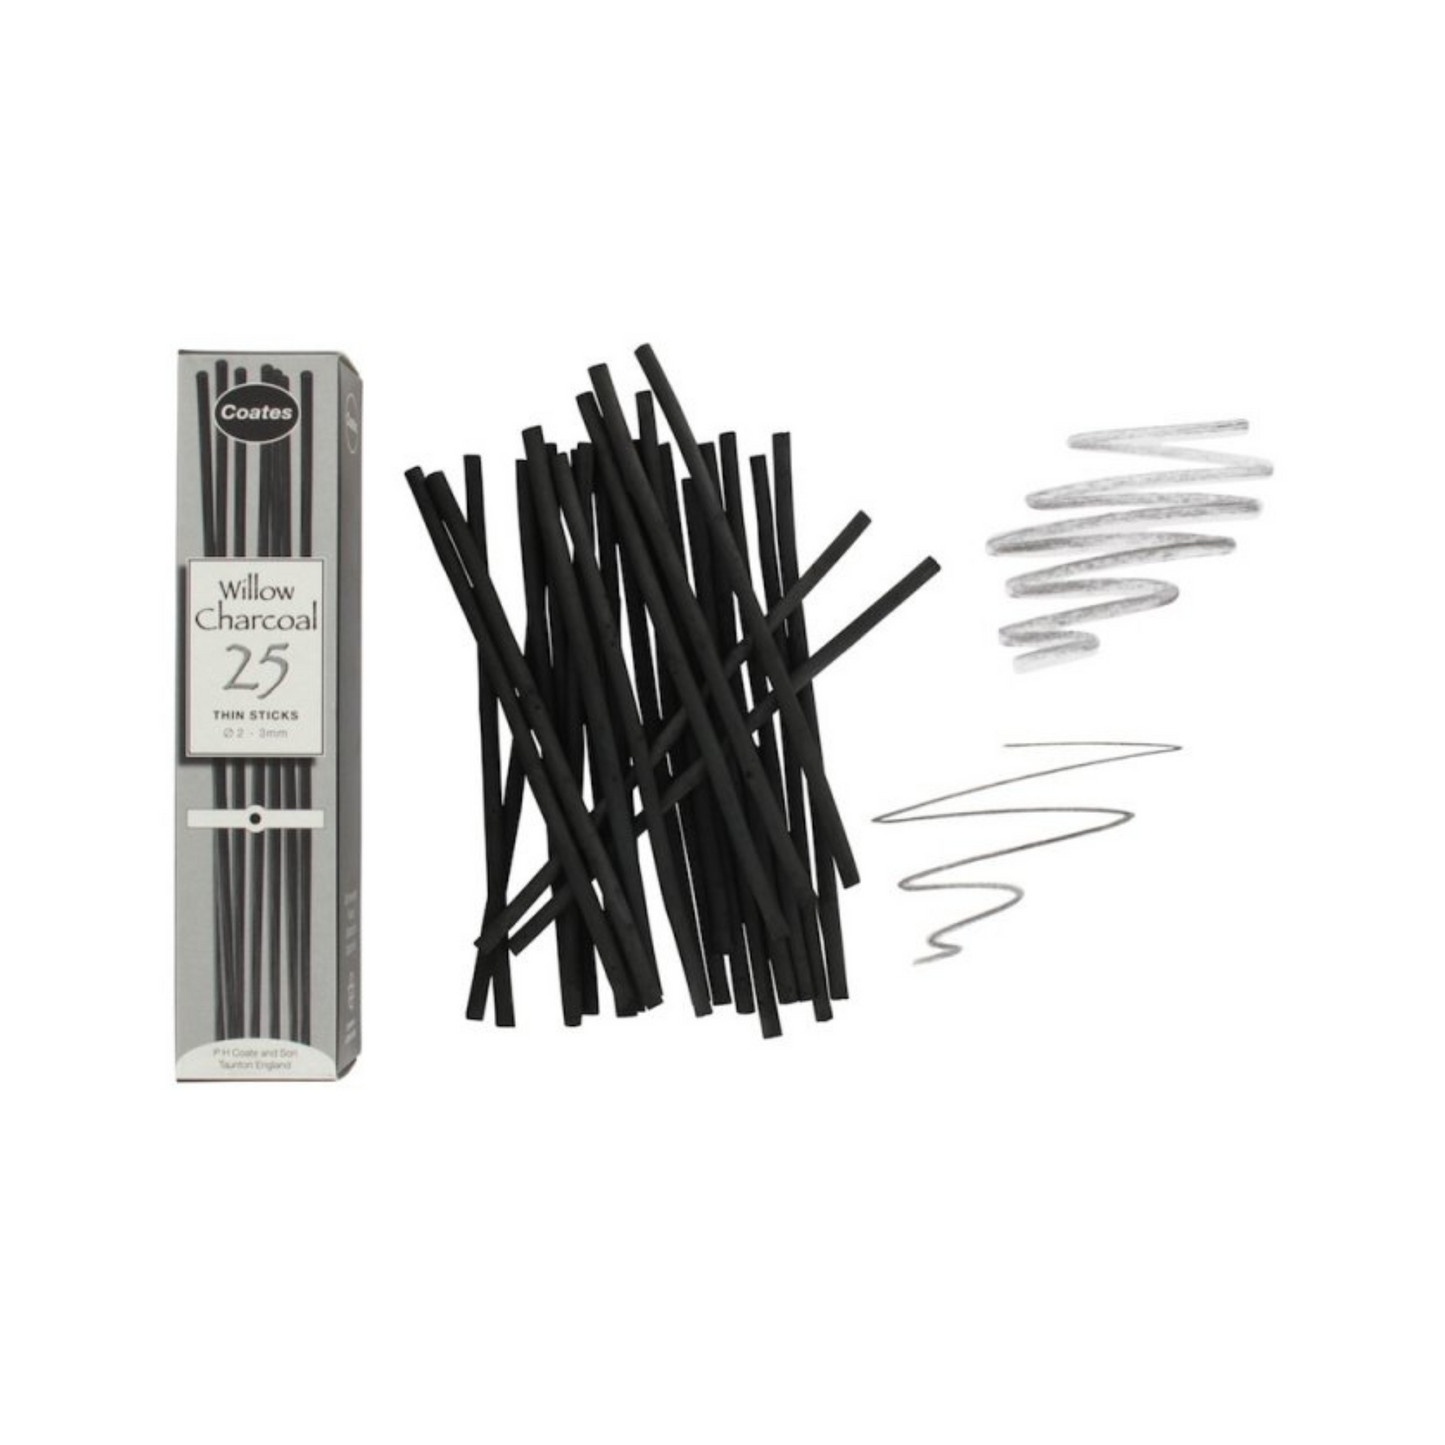 Willow Charcoal - 25 thin sticks